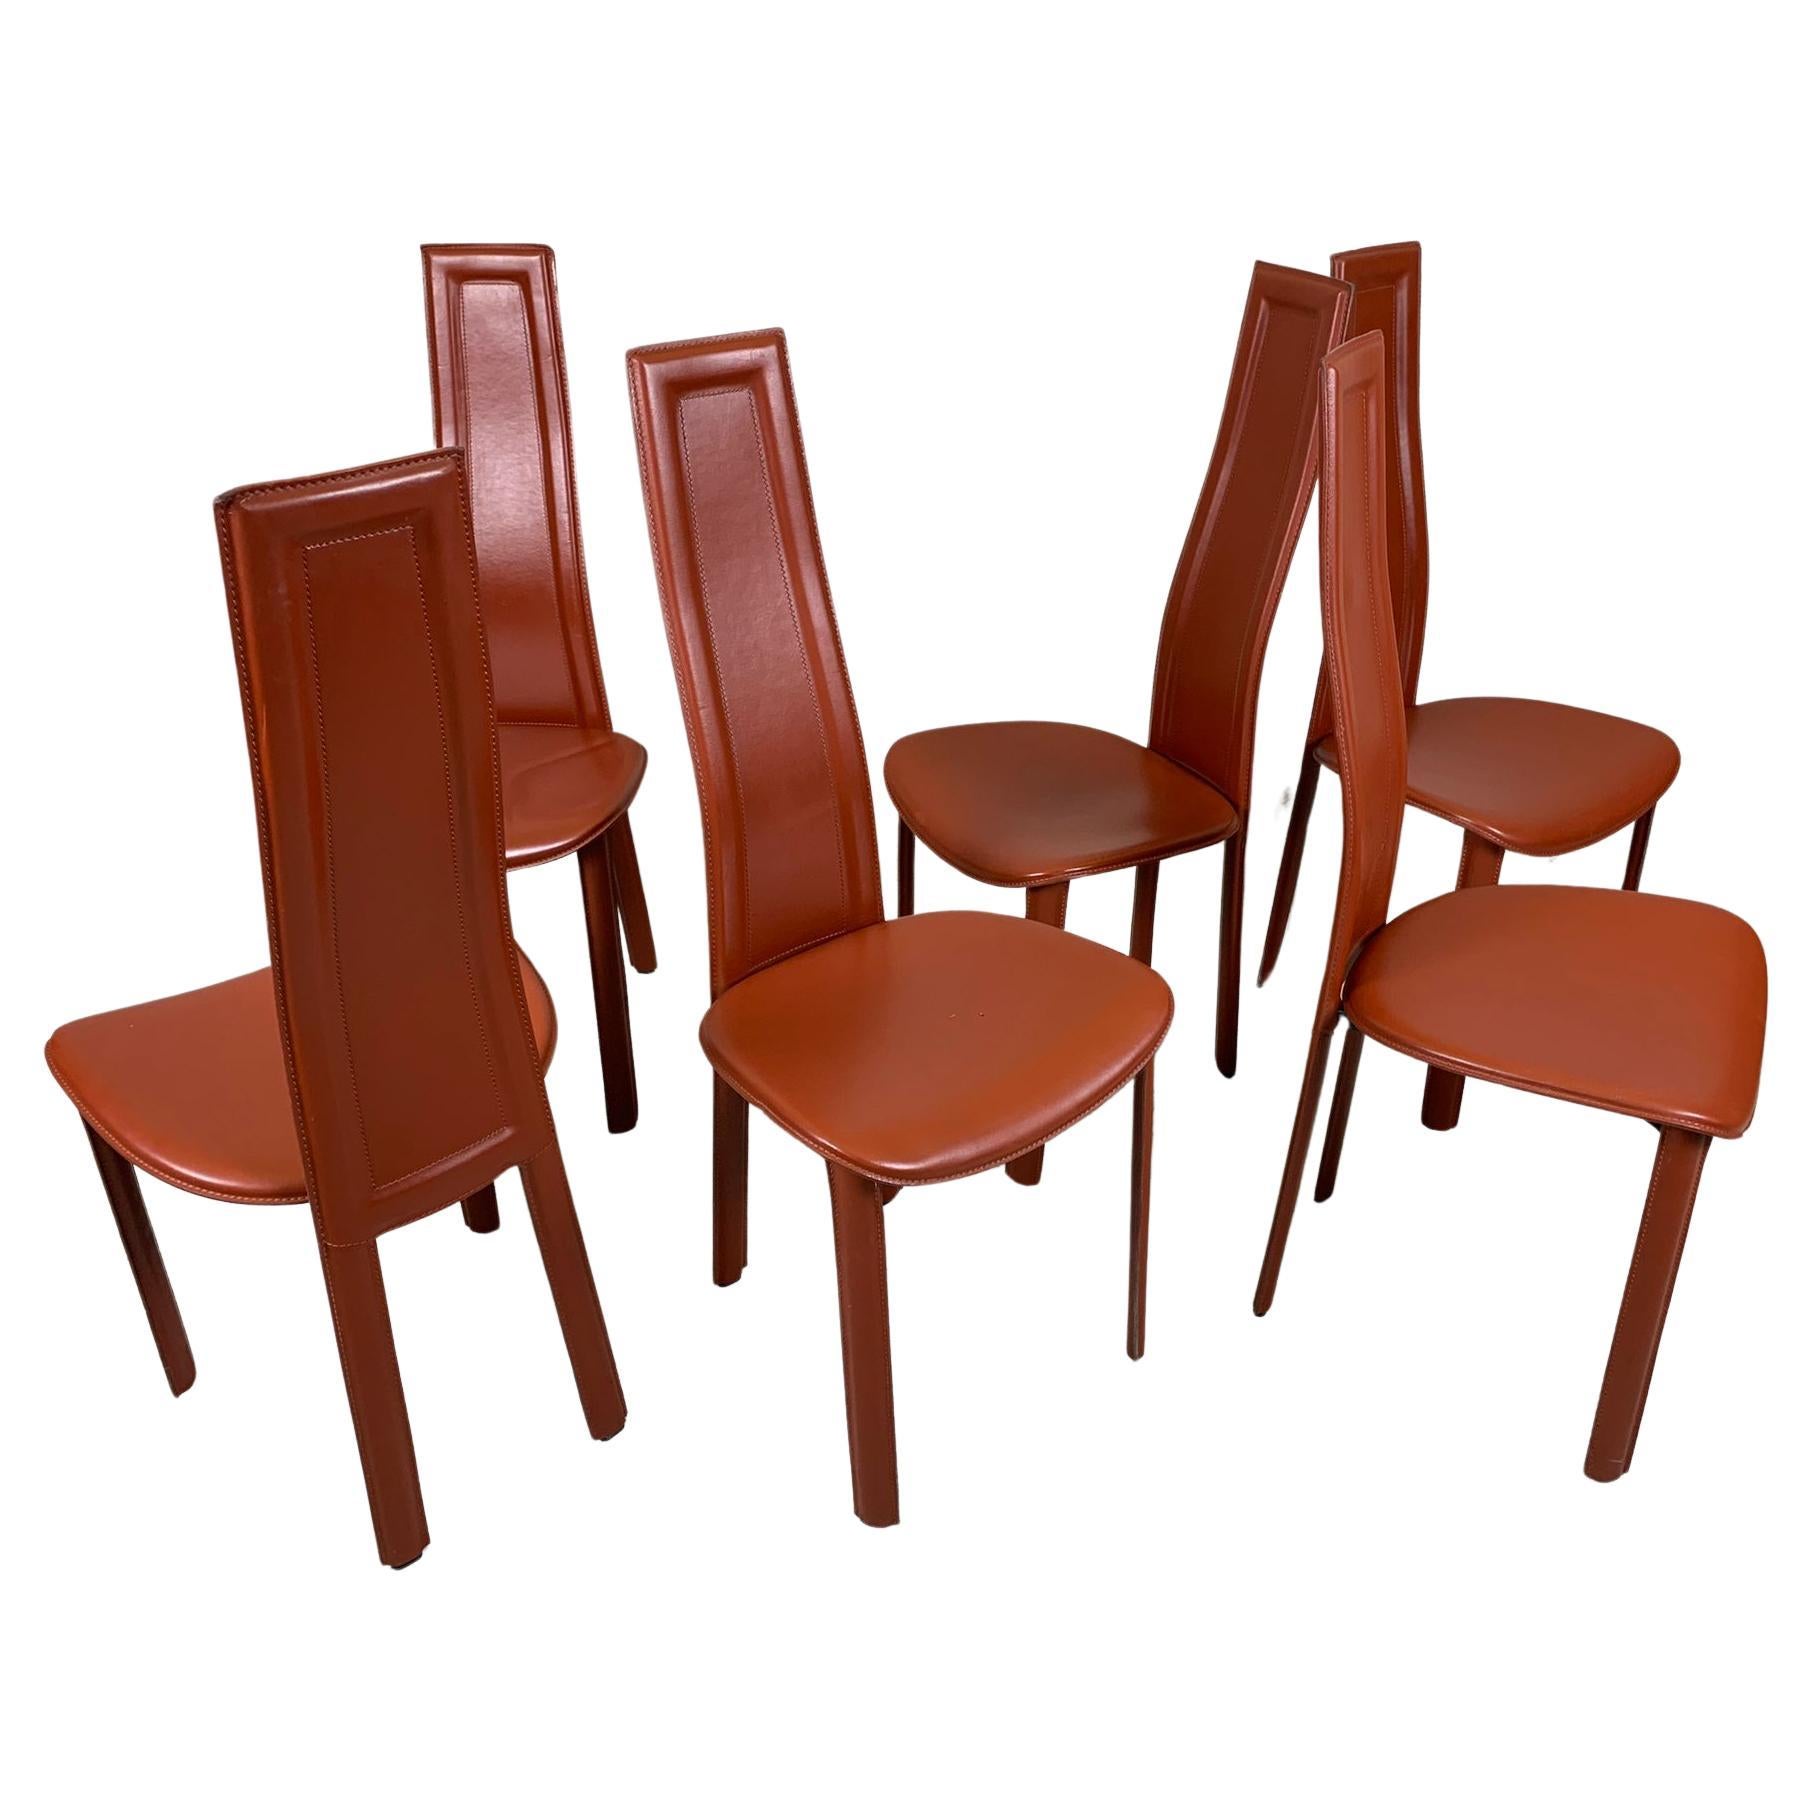 Set Of 6 High Back Dining Room Chairs By Arper For Sale